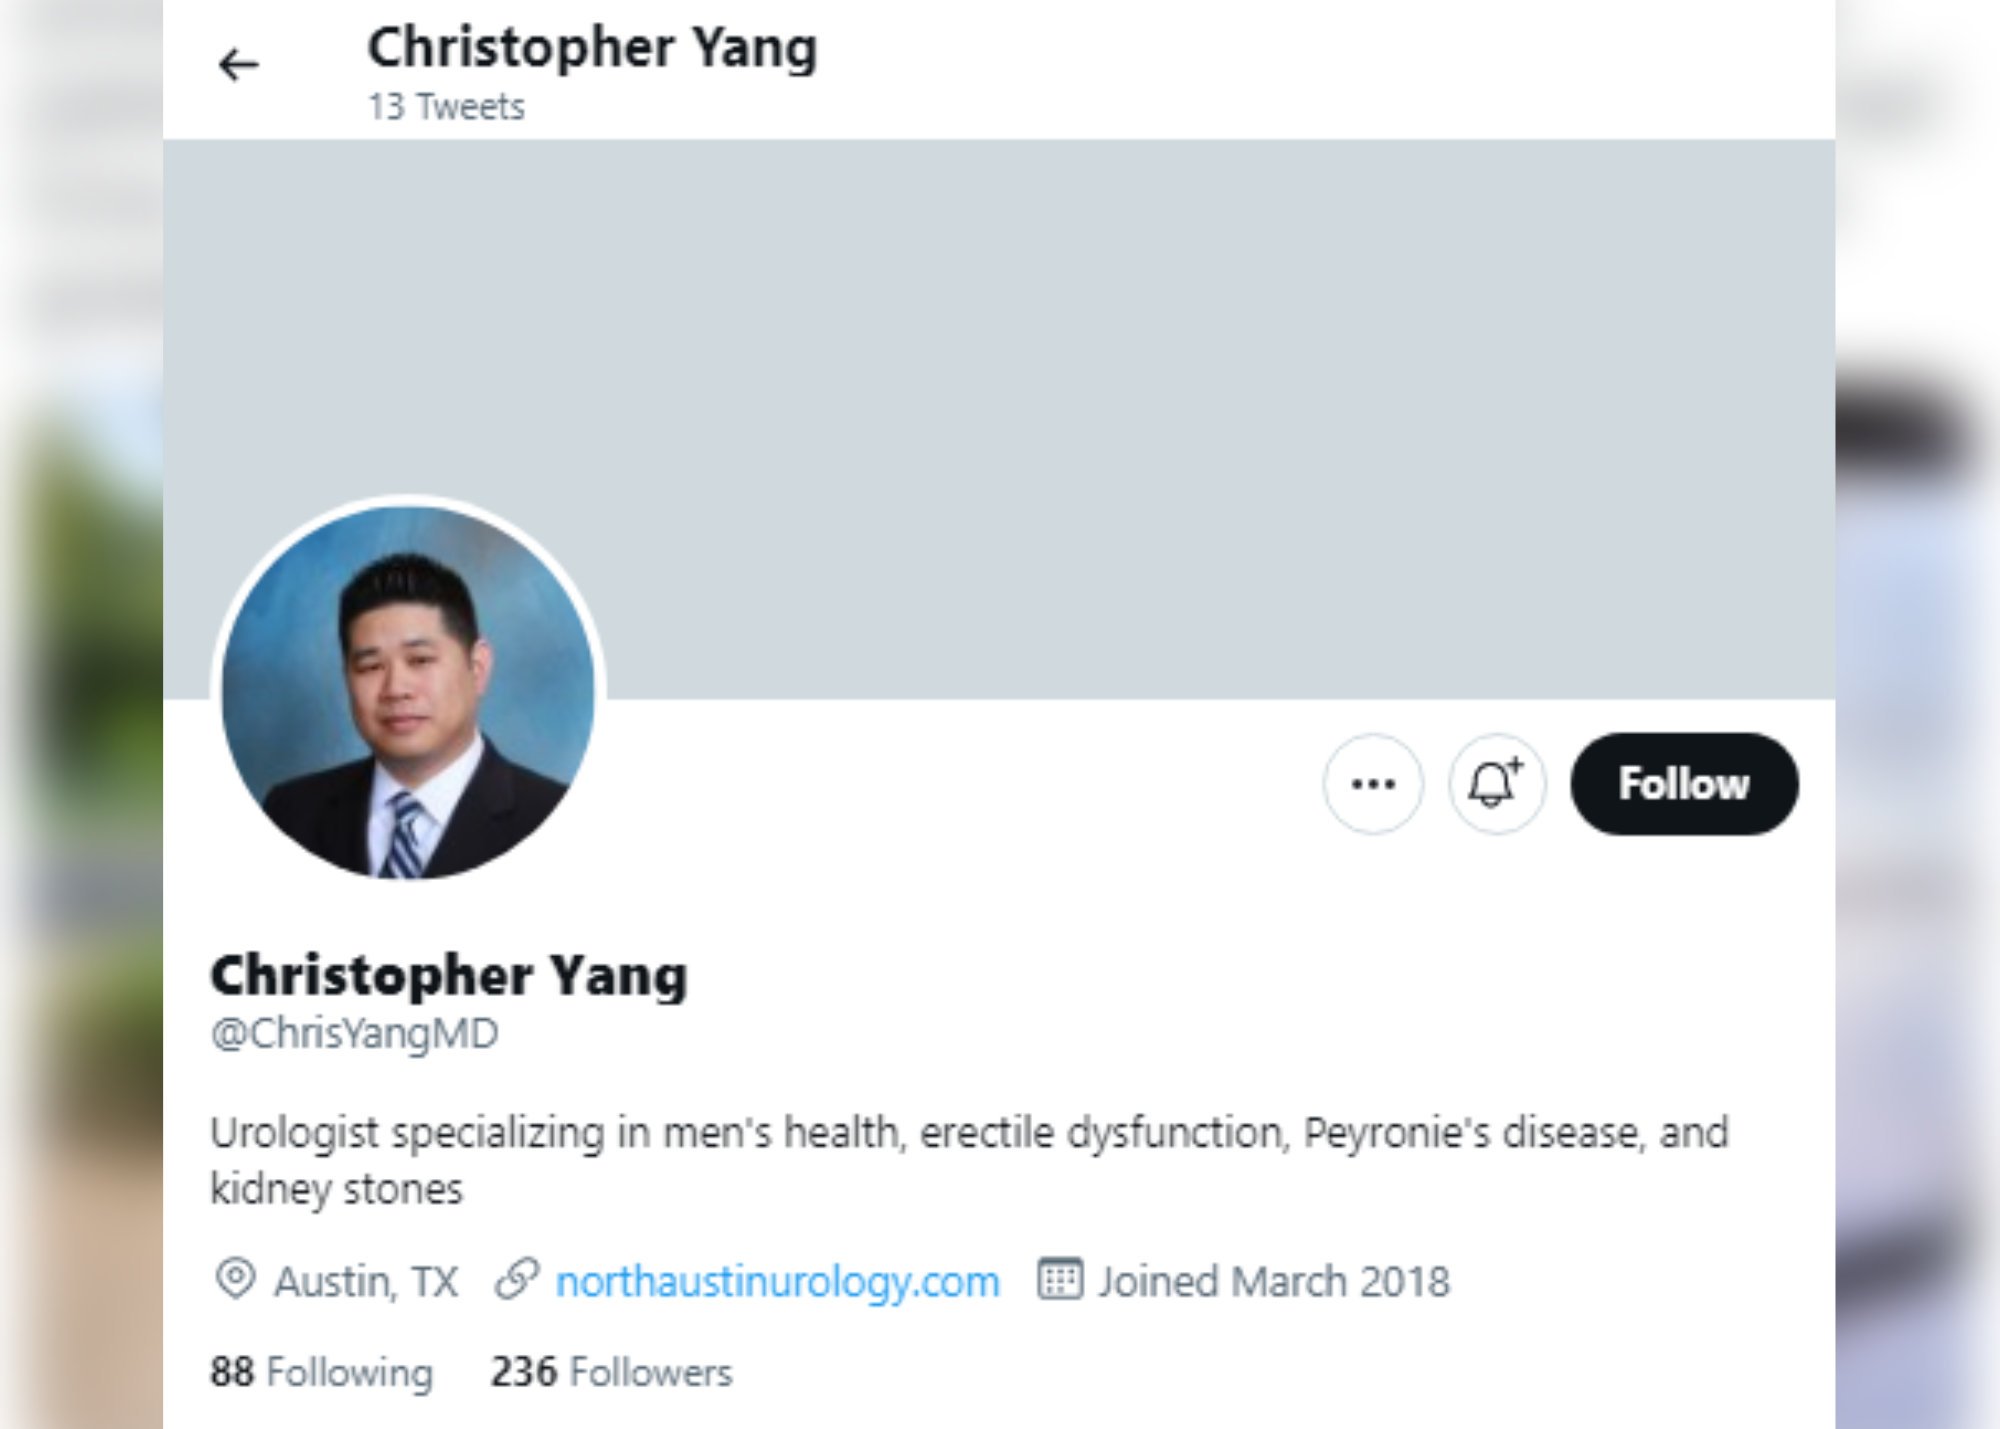 Screenshot of Dr. Christopher Yang Twitter accound with his profile picture and bio